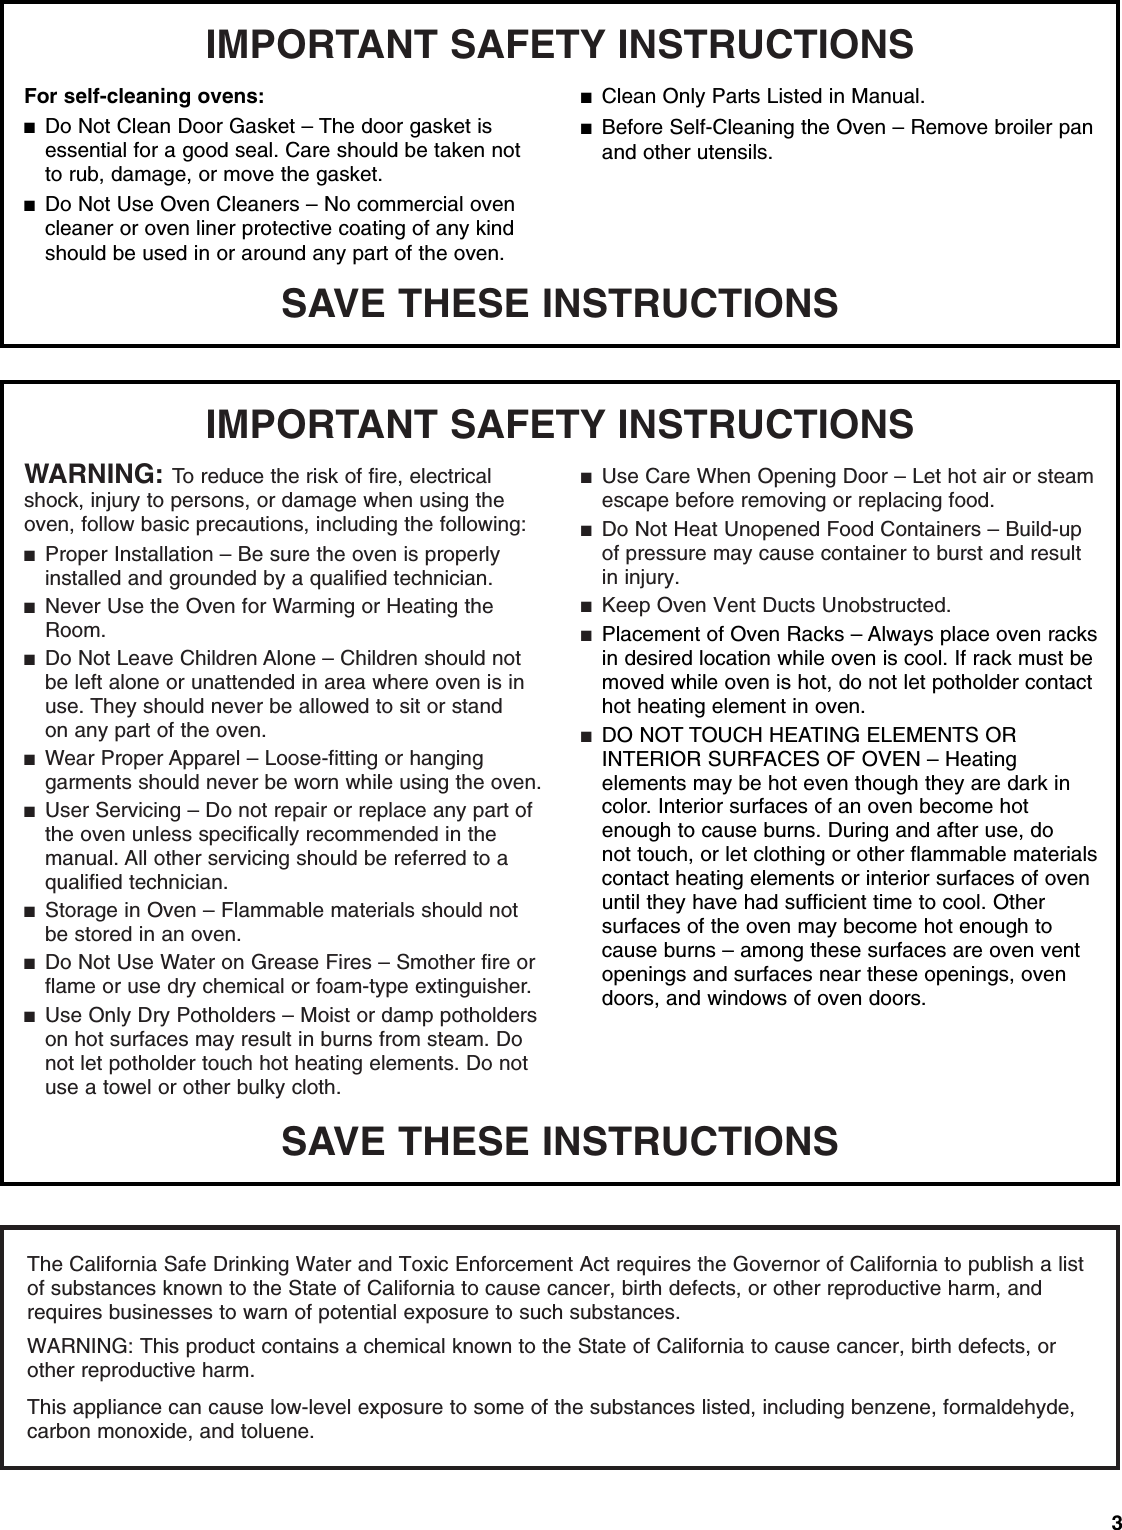 3SAVE THESE INSTRUCTIONSWARNING: To reduce the risk of fire, electrical shock, injury to persons, or damage when using the oven, follow basic precautions, including the following:■Proper Installation – Be sure the oven is properly installed and grounded by a qualified technician.■Never Use the Oven for Warming or Heating the Room.■Do Not Leave Children Alone – Children should not be left alone or unattended in area where oven is in use. They should never be allowed to sit or standon any part of the oven.■Wear Proper Apparel – Loose-fitting or hanging garments should never be worn while using the oven.■User Servicing – Do not repair or replace any part of the oven unless specifically recommended in the manual. All other servicing should be referred to a qualified technician.■Storage in Oven – Flammable materials should not be stored in an oven.■Do Not Use Water on Grease Fires – Smother fire or flame or use dry chemical or foam-type extinguisher. IMPORTANT SAFETY INSTRUCTIONS■Use Only Dry Potholders – Moist or damp potholders on hot surfaces may result in burns from steam. Do not let potholder touch hot heating elements. Do not use a towel or other bulky cloth.■Use Care When Opening Door – Let hot air or steam escape before removing or replacing food.■Do Not Heat Unopened Food Containers – Build-up of pressure may cause container to burst and result in injury.■Keep Oven Vent Ducts Unobstructed.■Placement of Oven Racks – Always place oven racks in desired location while oven is cool. If rack must bemoved while oven is hot, do not let potholder contact hot heating element in oven.■DO NOT TOUCH HEATING ELEMENTS OR INTERIOR SURFACES OF OVEN – Heating elements may be hot even though they are dark in color. Interior surfaces of an oven become hot enough to cause burns. During and after use, do not touch, or let clothing or other flammable materials contact heating elements or interior surfaces of oven until they have had sufficient time to cool. Other surfaces of the oven may become hot enough to cause burns – among these surfaces are oven vent openings and surfaces near these openings, oven doors, and windows of oven doors.SAVE THESE INSTRUCTIONSFor self-cleaning ovens:■Do Not Clean Door Gasket – The door gasket is essential for a good seal. Care should be taken not to rub, damage, or move the gasket.■Do Not Use Oven Cleaners – No commercial oven cleaner or oven liner protective coating of any kind should be used in or around any part of the oven. IMPORTANT SAFETY INSTRUCTIONS■Clean Only Parts Listed in Manual.■Before Self-Cleaning the Oven – Remove broiler pan and other utensils. The California Safe Drinking Water and Toxic Enforcement Act requires the Governor of California to publish a list of substances known to the State of California to cause cancer, birth defects, or other reproductive harm, and requires businesses to warn of potential exposure to such substances.  WARNING: This product contains a chemical known to the State of California to cause cancer, birth defects, or other reproductive harm.This appliance can cause low-level exposure to some of the substances listed, including benzene, formaldehyde, carbon monoxide, and toluene.